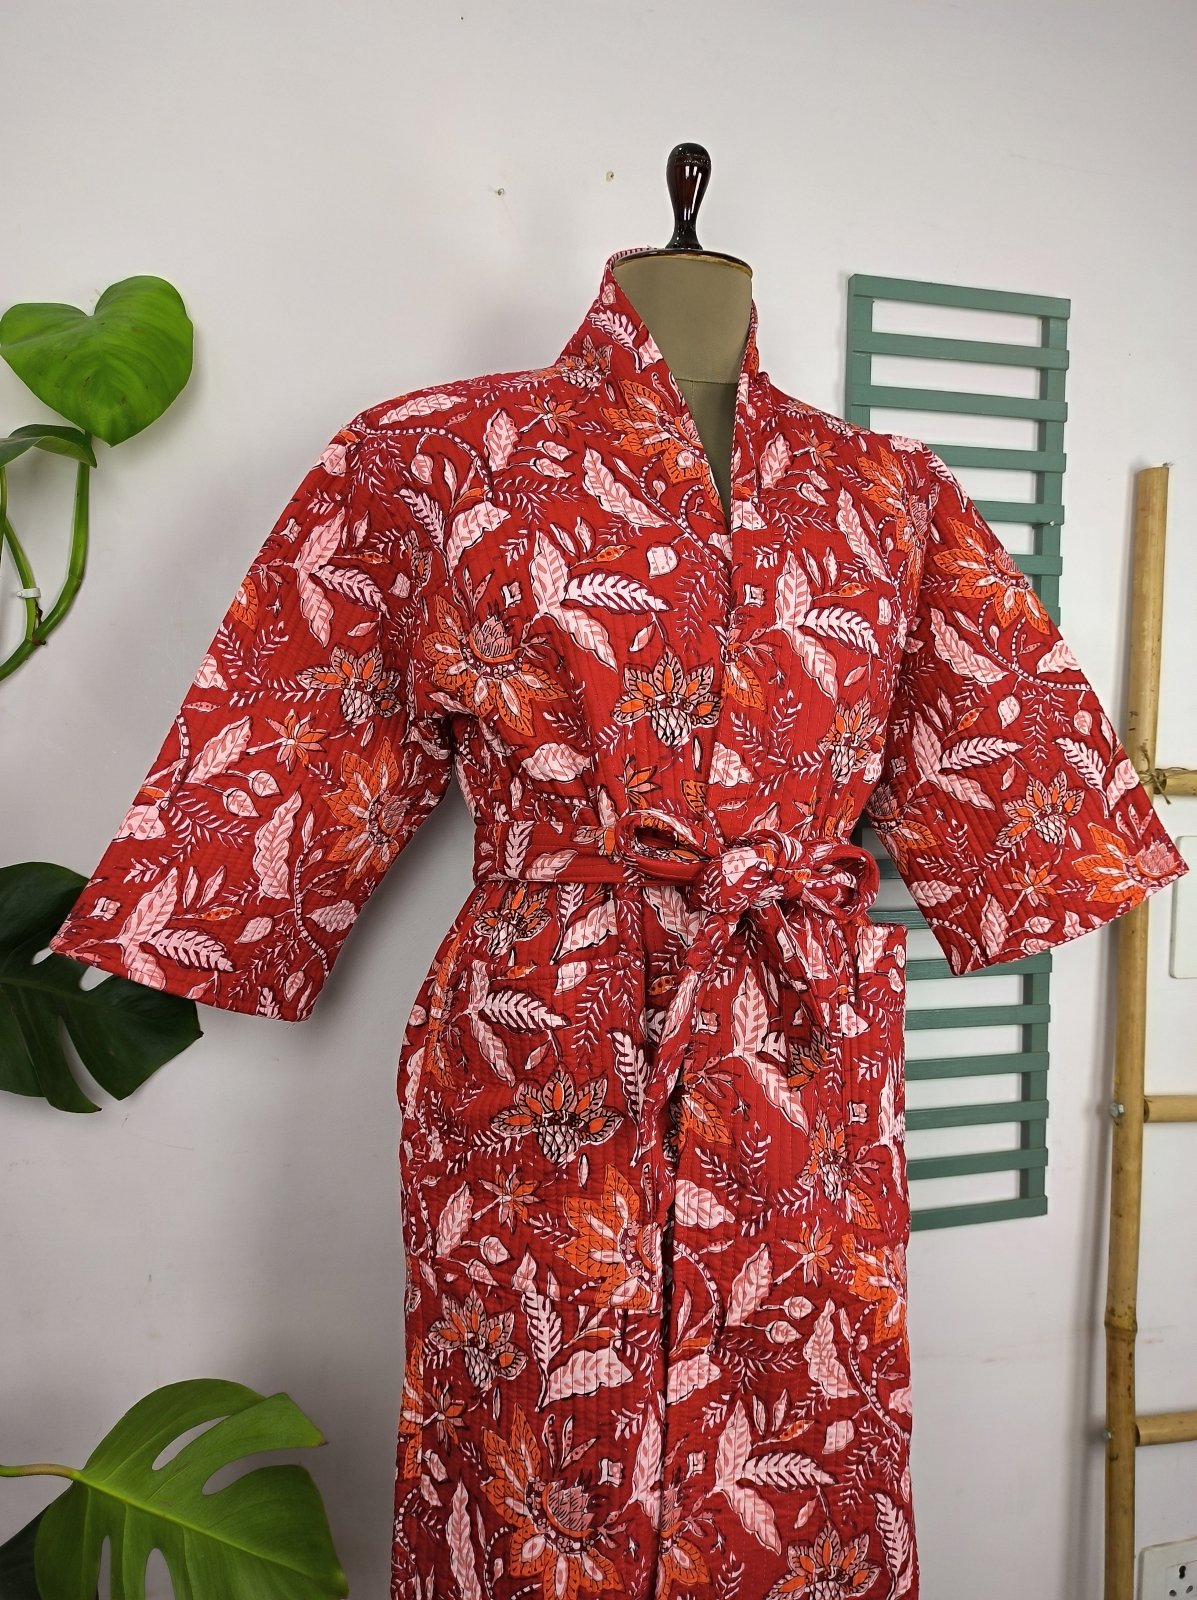 Reversible Pure Cotton Kantha Quilted Unisex Red Floral Kimono | Perfect Dressing Fall Autumn Winter Boho Indian Block Printed Stripes Robe - The Eastern Loom